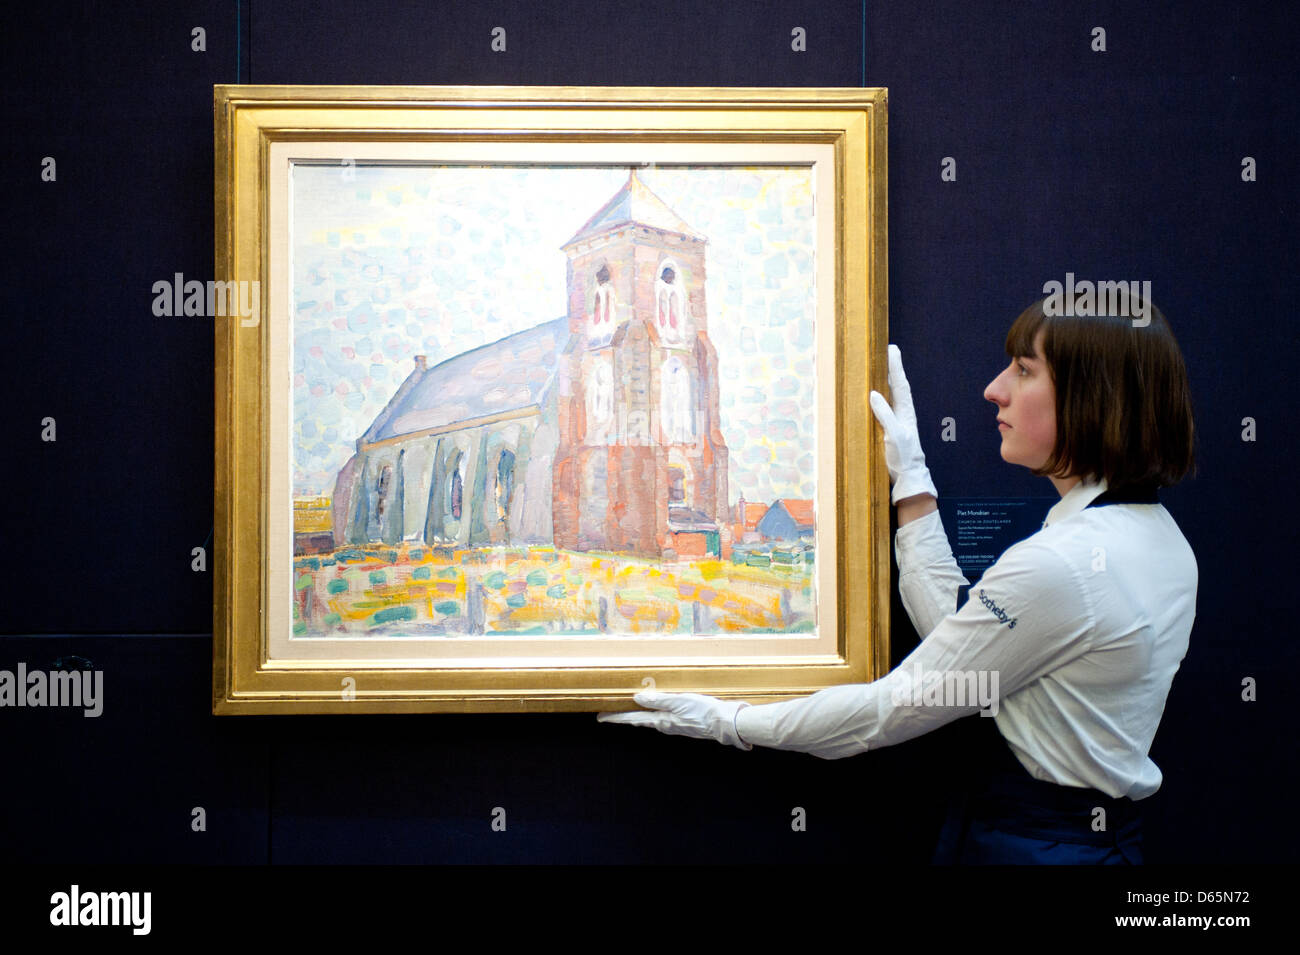 London, UK. 12th April 2013. A Sotheby's employee poses in front of  Piet Mondrian 'Church in Zouteland' (Est. $500.000-700.000). The work will go on sale at Sotheby’s New York in May 2013. The Blockbuster sales at include works by Richter, Modigliani, Picasso, Rodin, Bacon, Cezanne. Credit: Piero Cruciatti / Alamy Live News Stock Photo